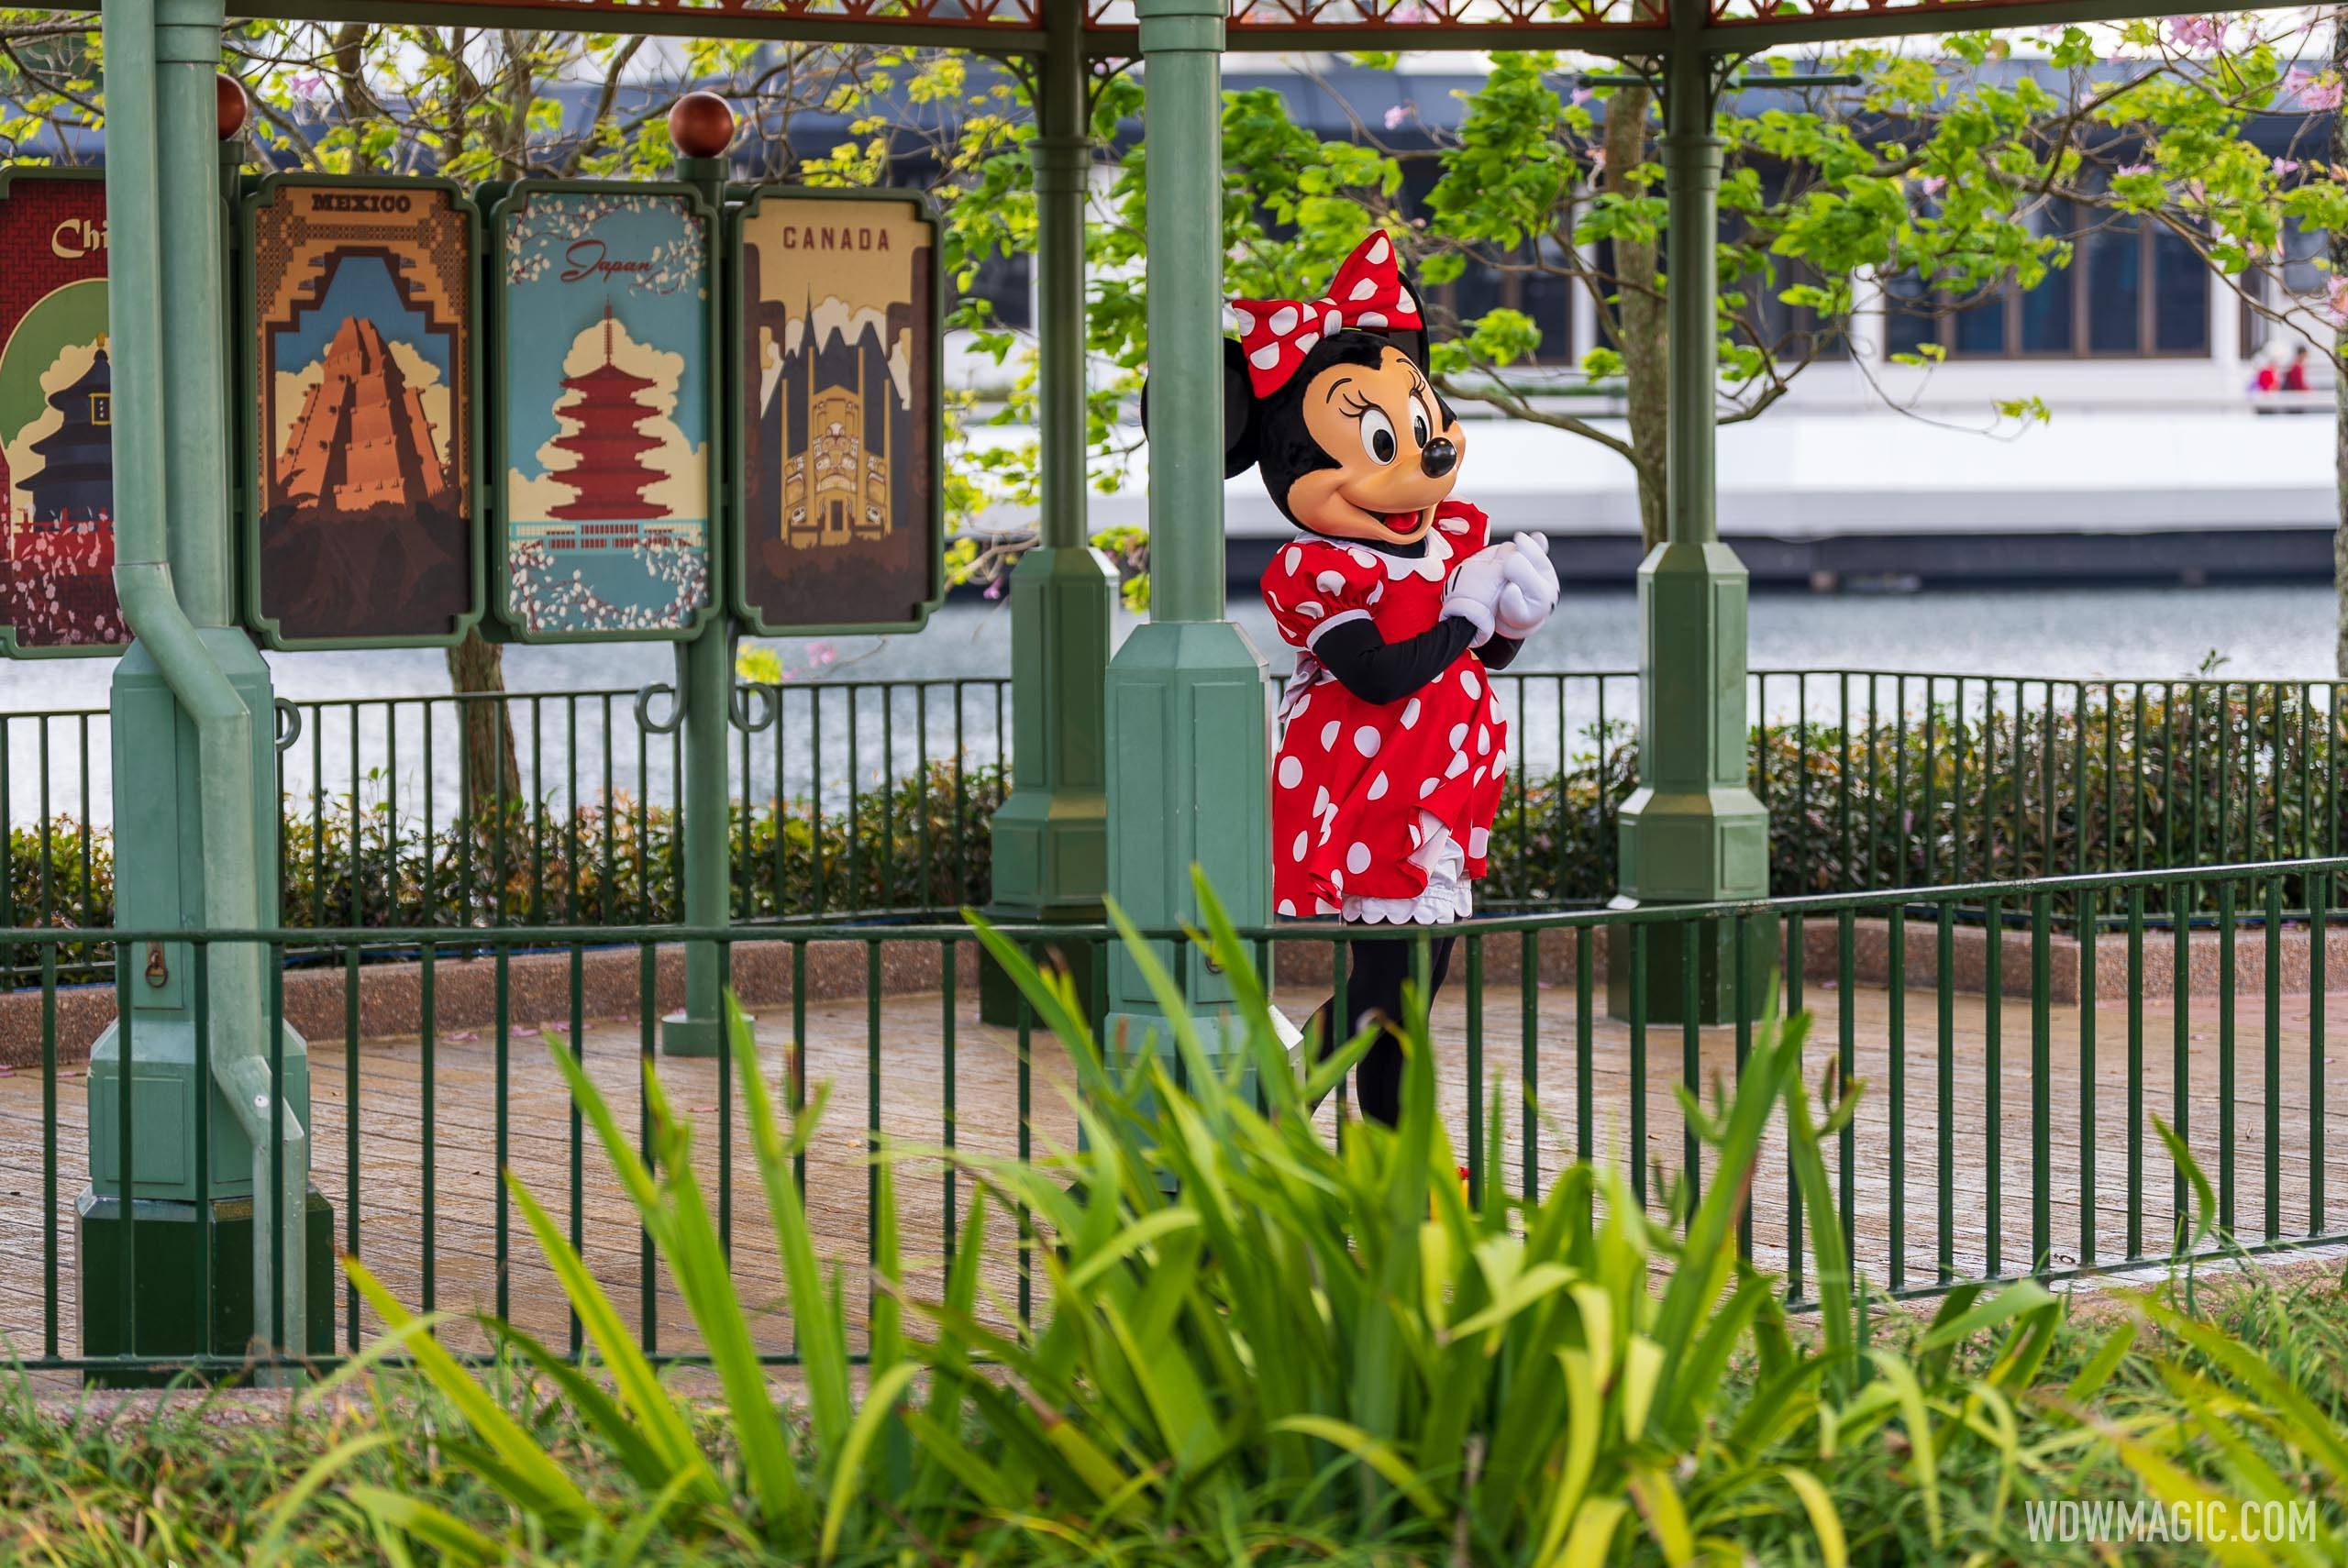 Distanced Minnie Mouse meet and greet at the EPCOT World Showcase Gazebo - March 2022